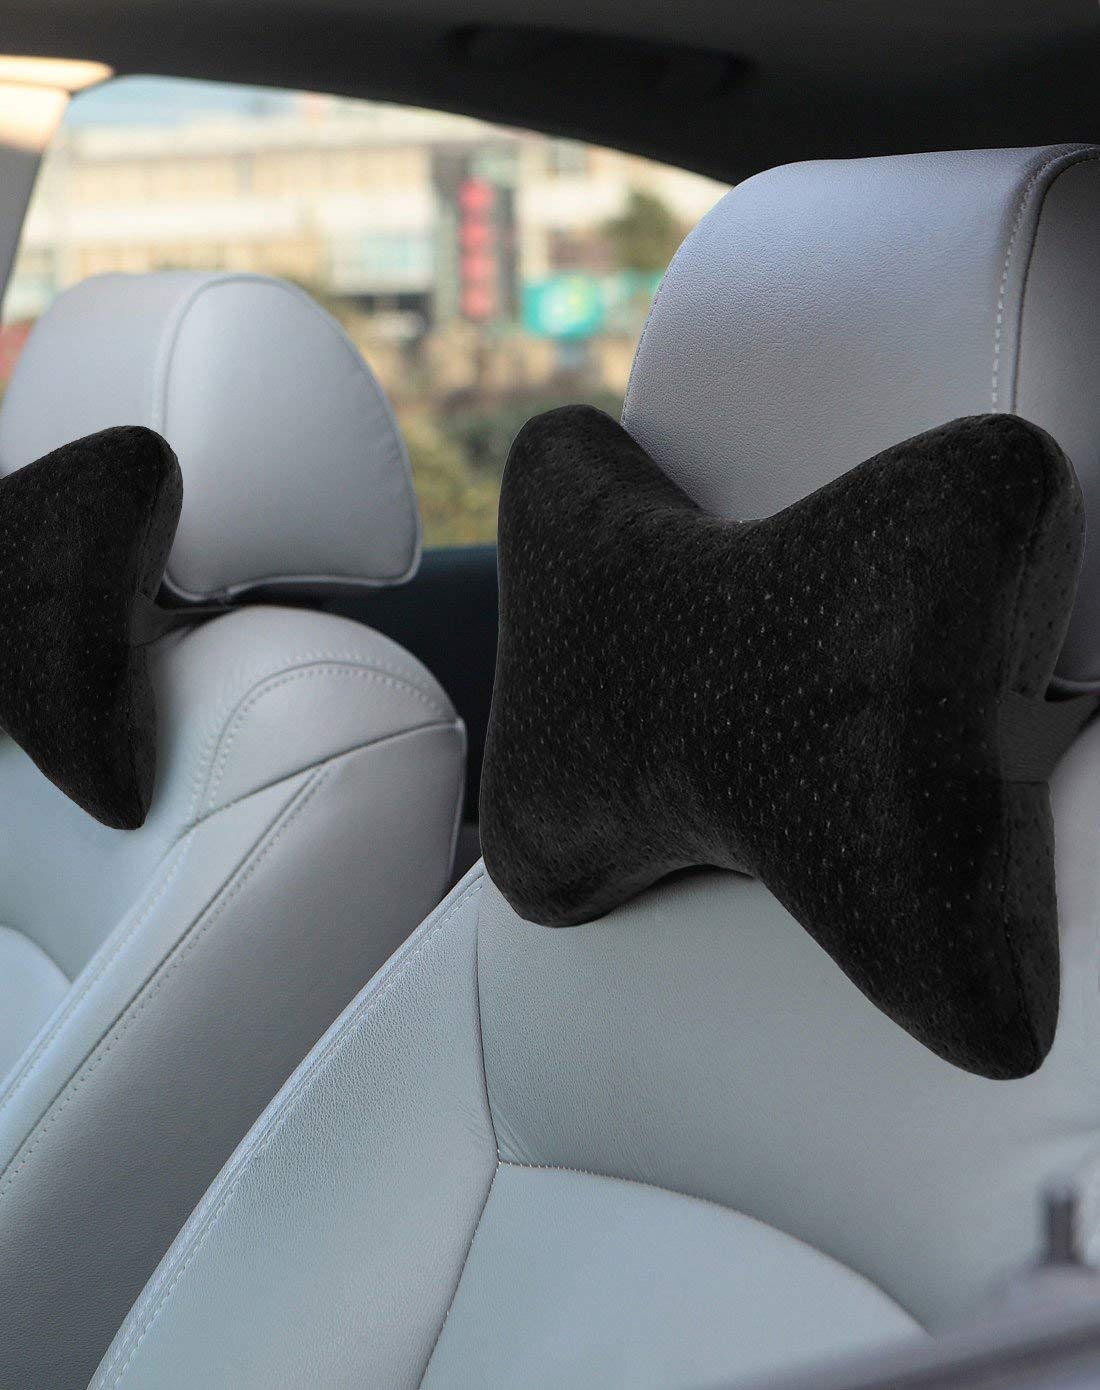 Best Headrest Pillows For Your Car 2022 Lie Back And Read